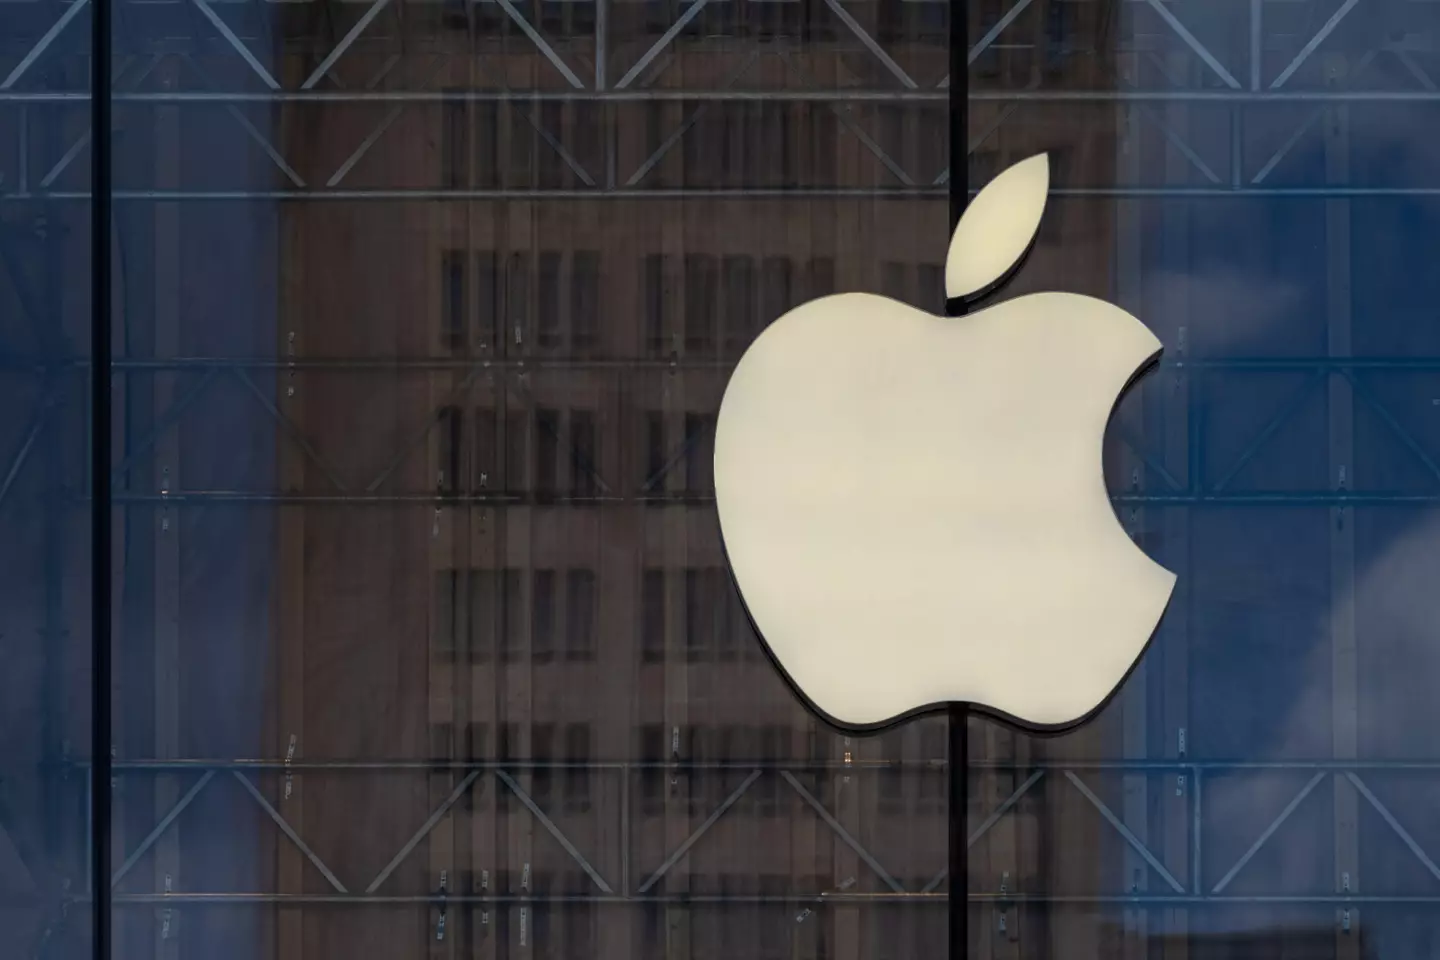 A person died after a car crashed into the Apple Store in Hingham, Massachusetts last Monday.